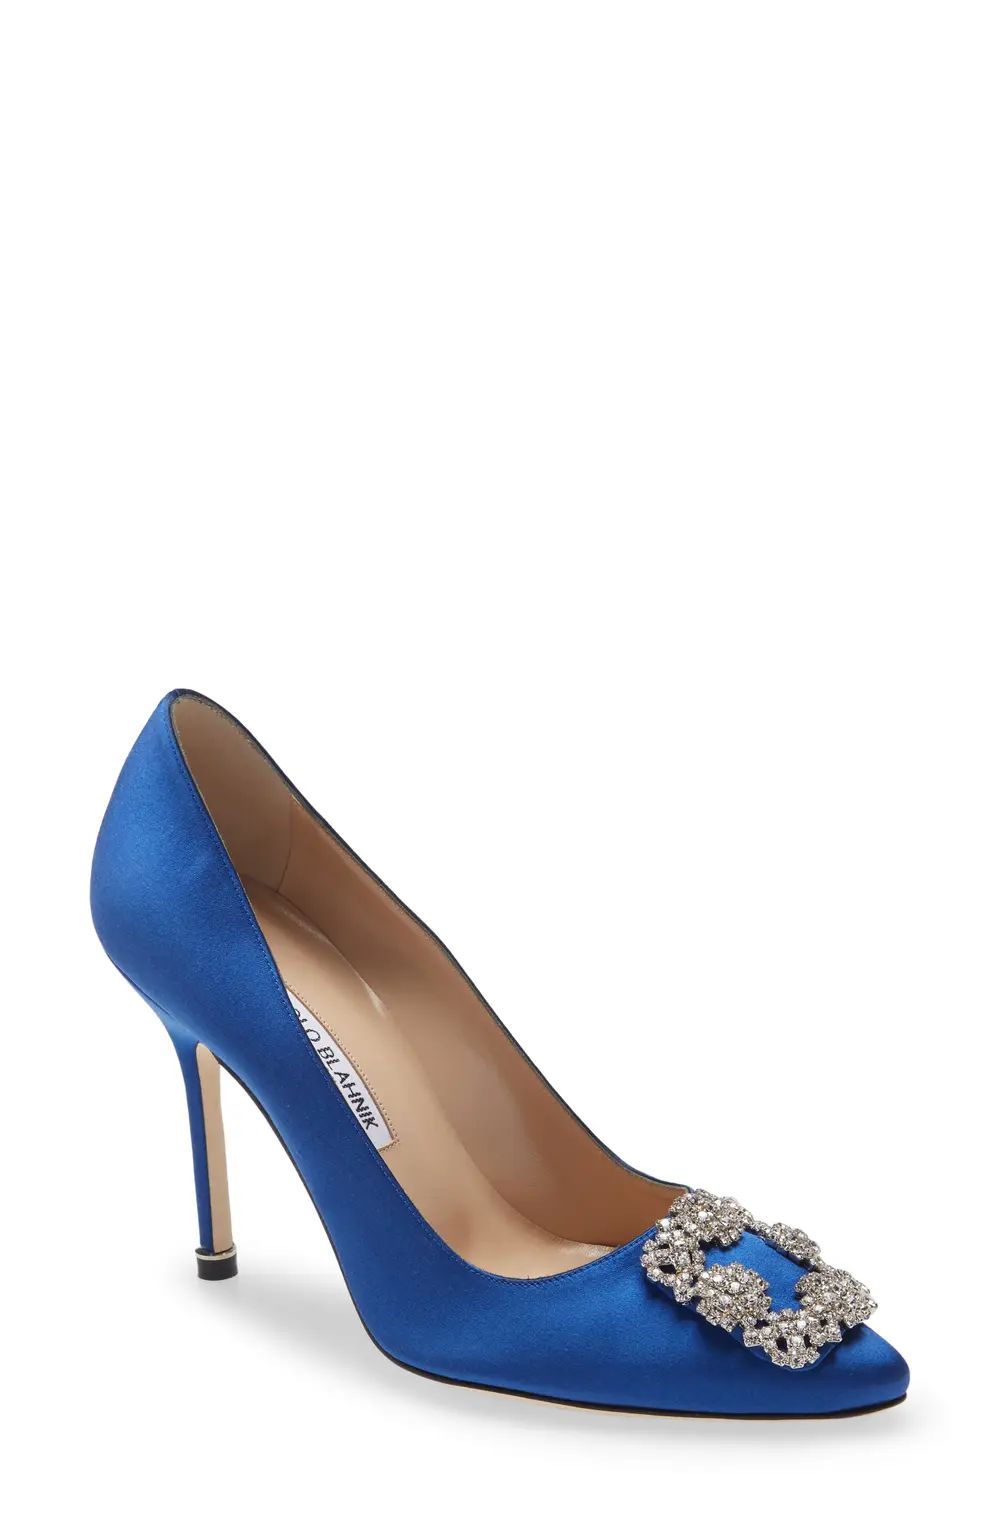 Manolo Blahnik Hangisi Crystal Buckle Pump, Size 7Us / 37Eu in Blue Satin Clear/Buckle at Nordstrom | Nordstrom Canada